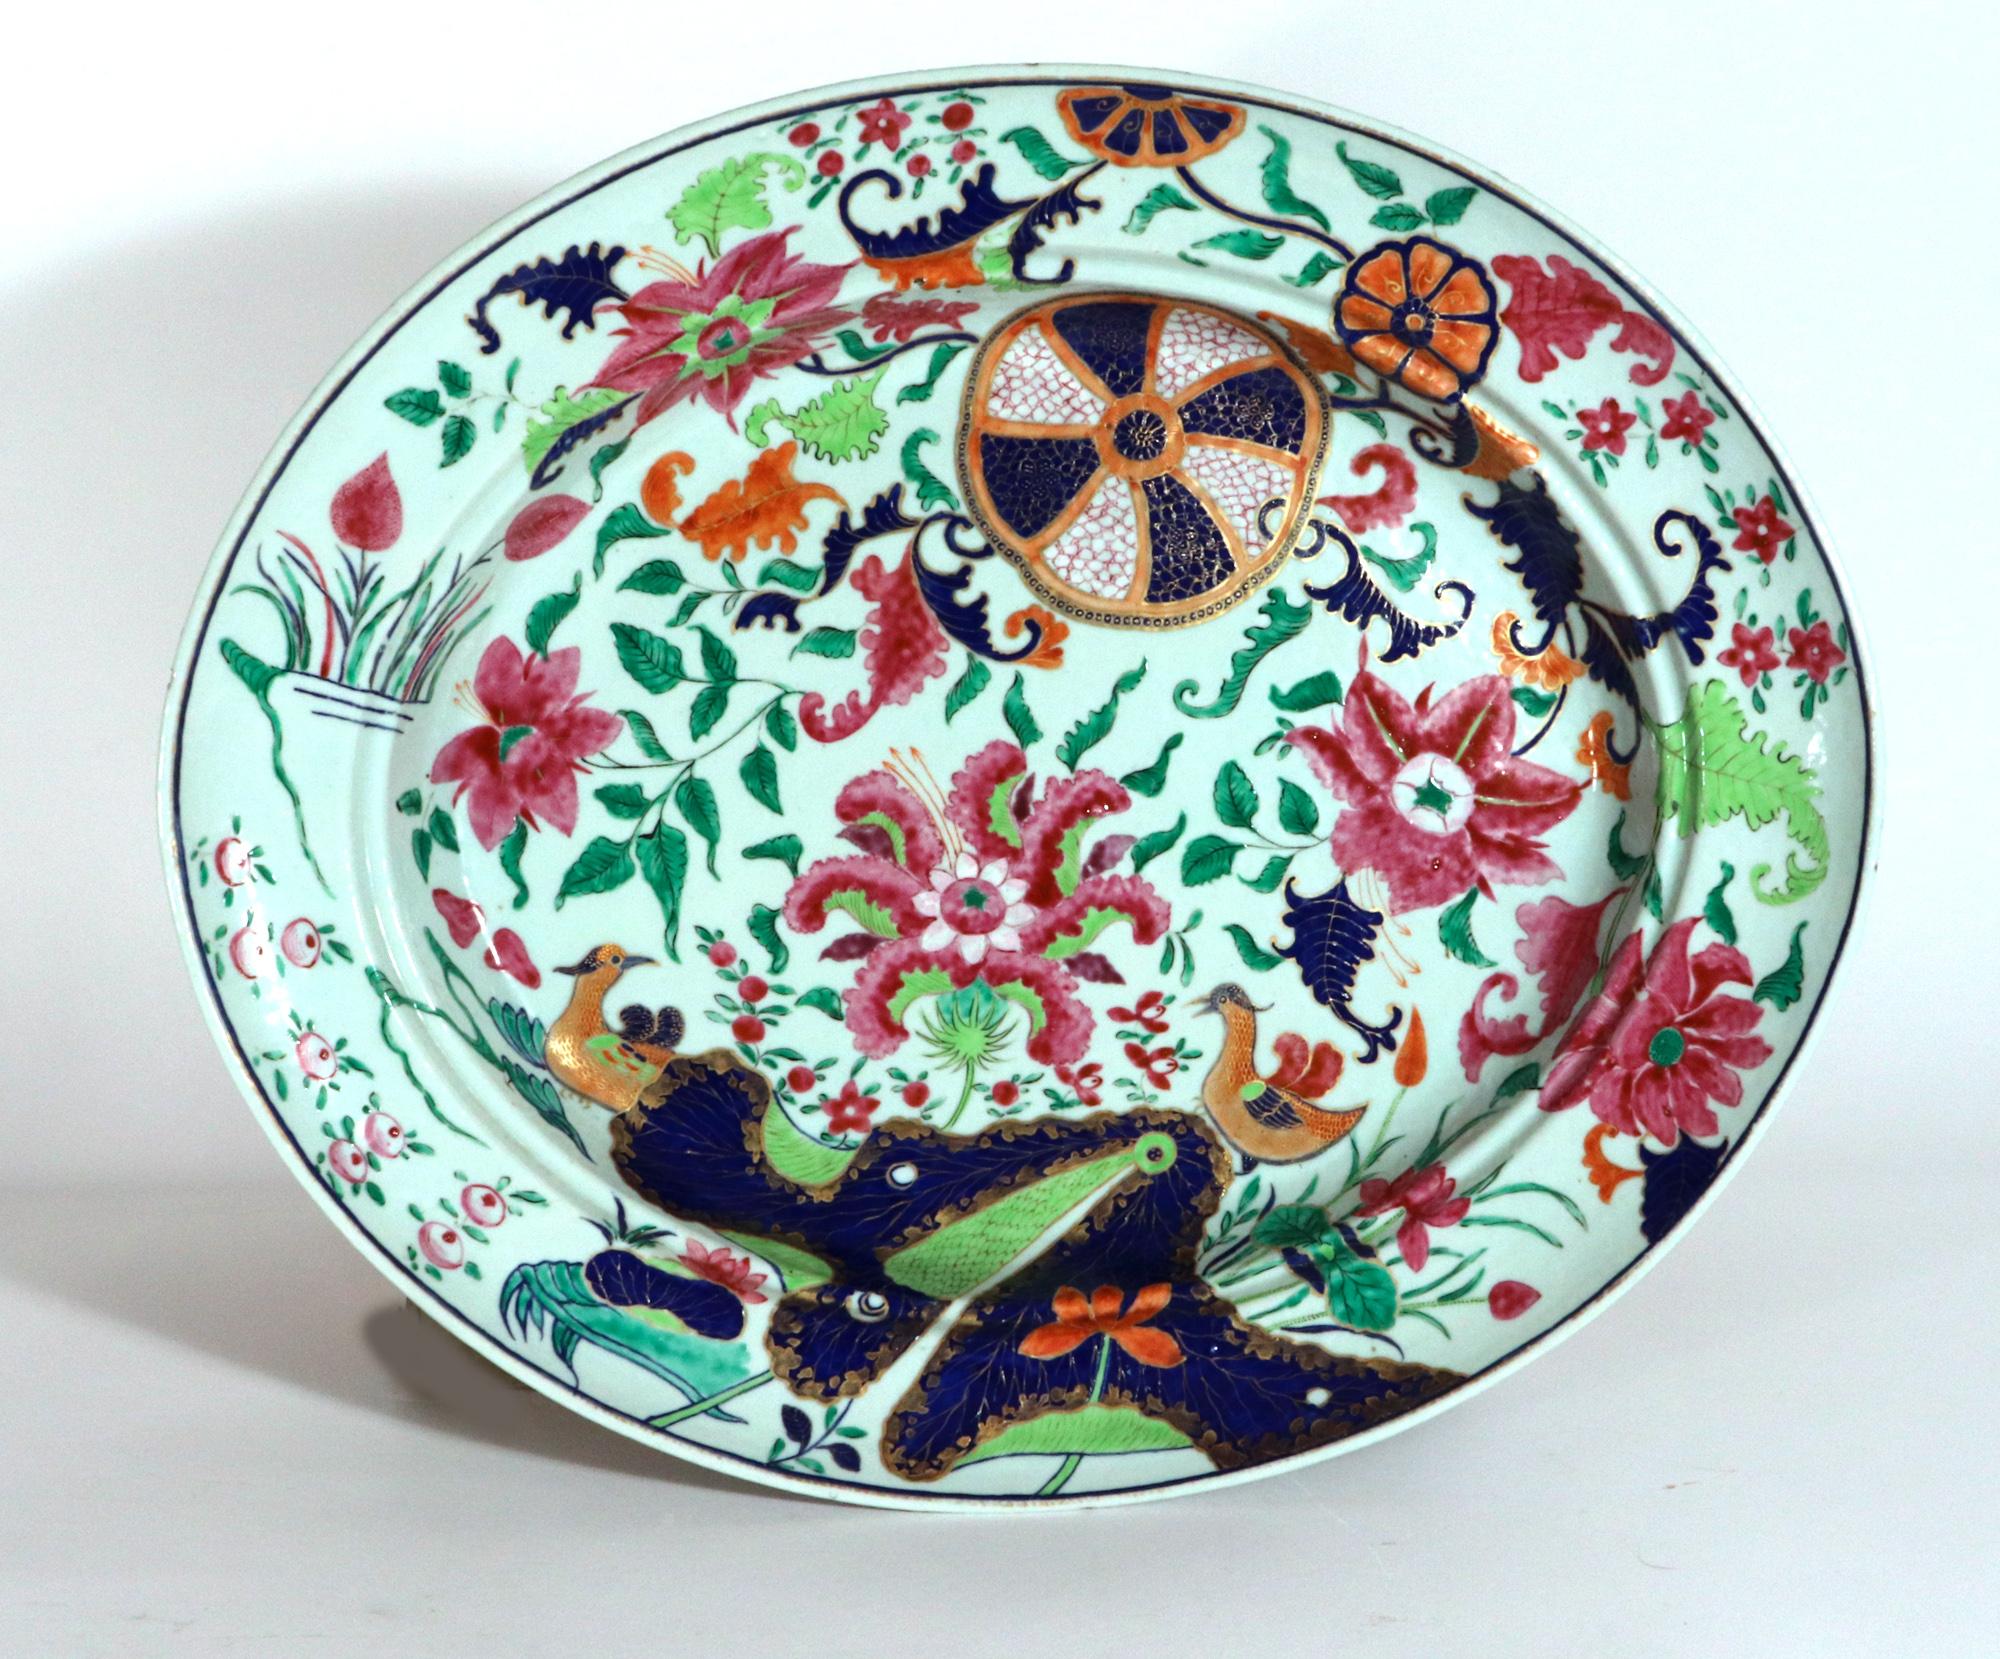 Chinese Export Porcelain Pseudo Tobacco Leaf Large Dish and Drainer,
Circa 1765-75

The oval Chinese Export deep dish is fully painted with a variation of the Tobacco Leaf pattern with two Mandarin ducks amongst foliage and on either side of a blue